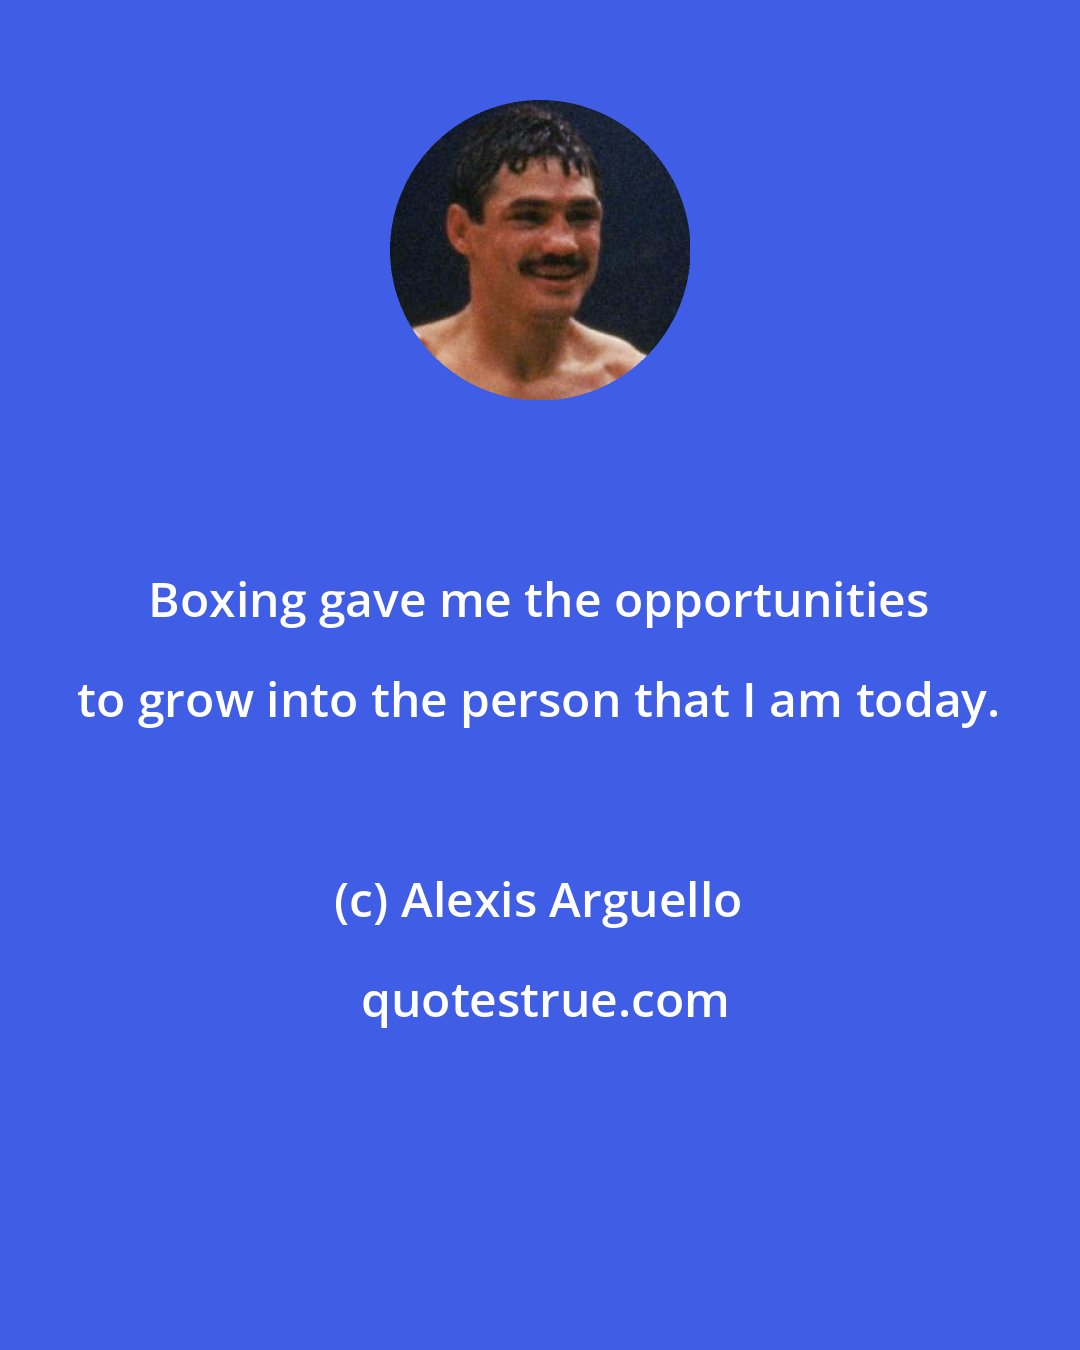 Alexis Arguello: Boxing gave me the opportunities to grow into the person that I am today.